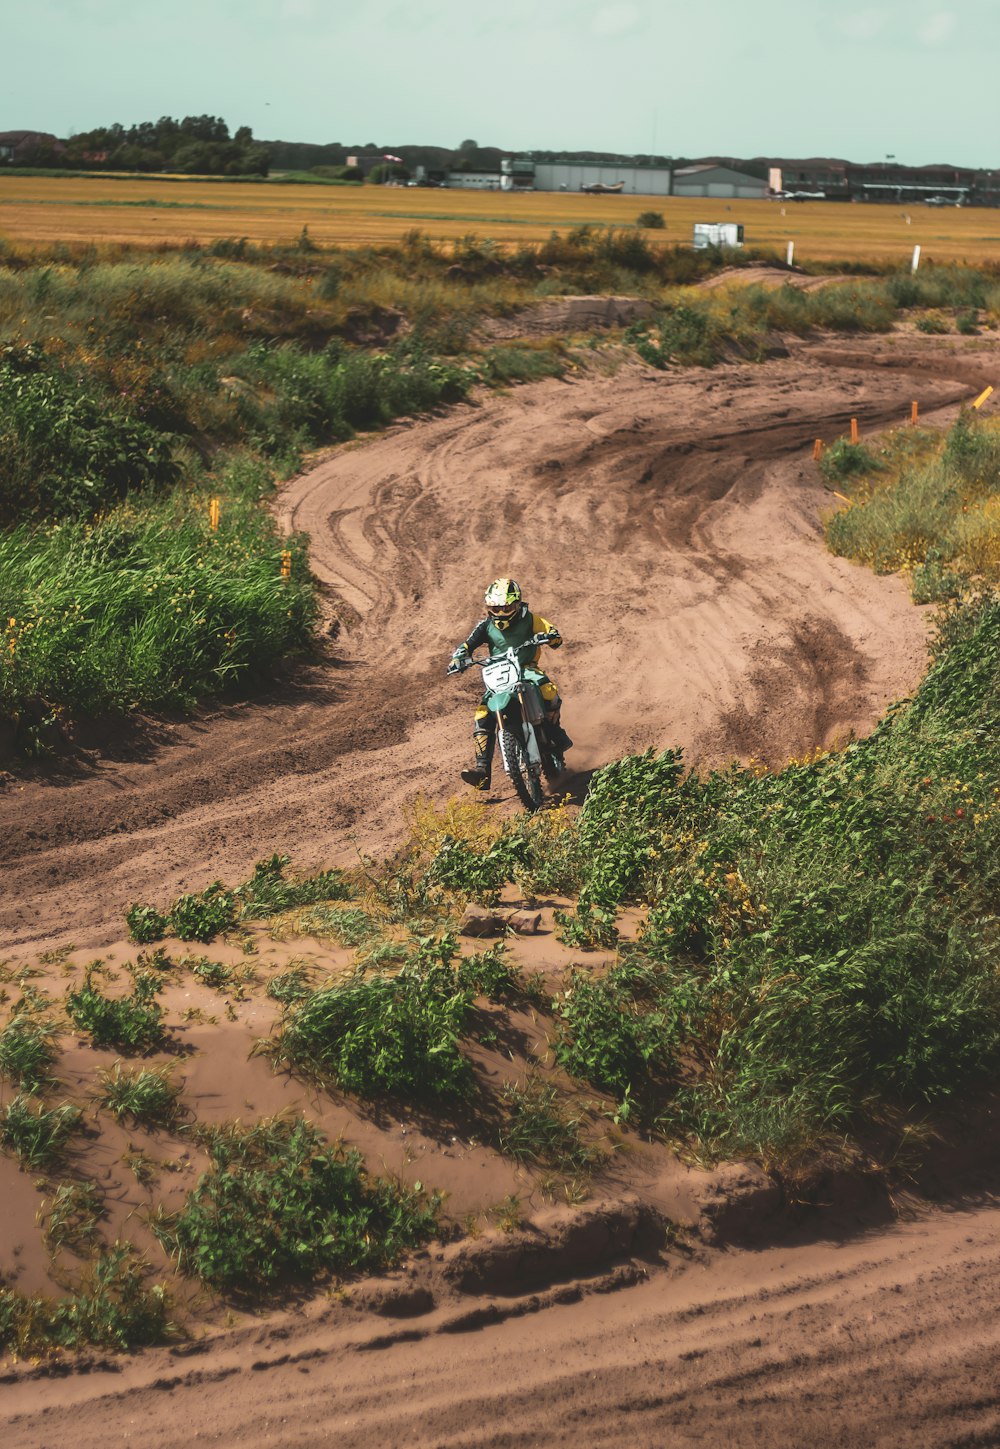 man in green jacket riding motorcycle on brown dirt road during daytime